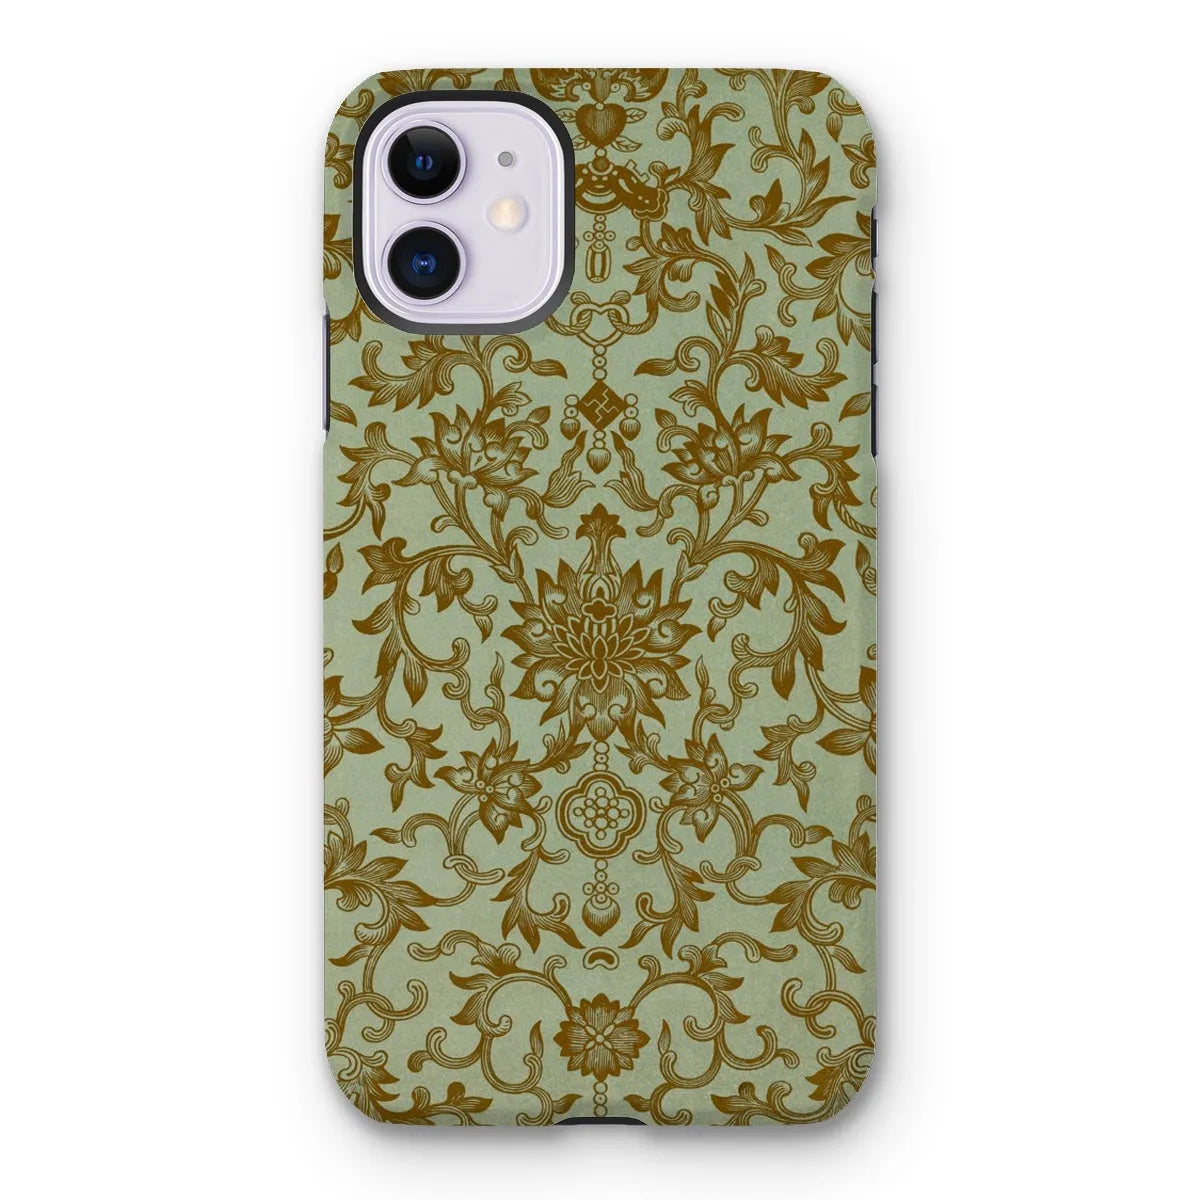 Earthy Chinese Floral Art Pattern Phone Case - Owen Jones - Iphone 11 / Matte - Mobile Phone Cases - Aesthetic Art